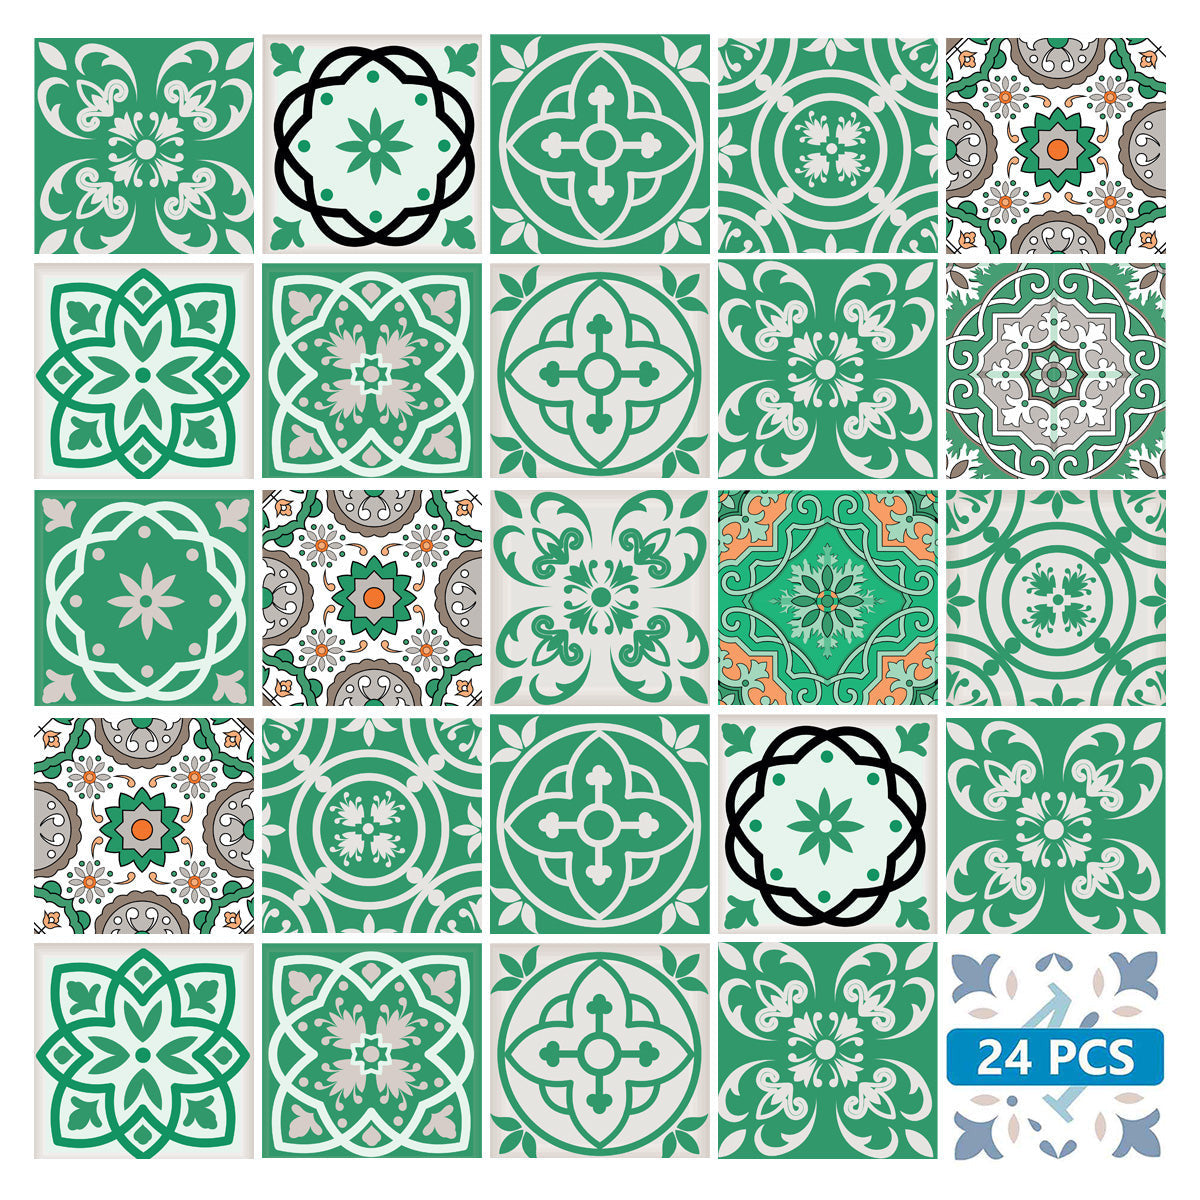 4" X 4" Green And White Mosaic Peel And Stick Removable Tiles